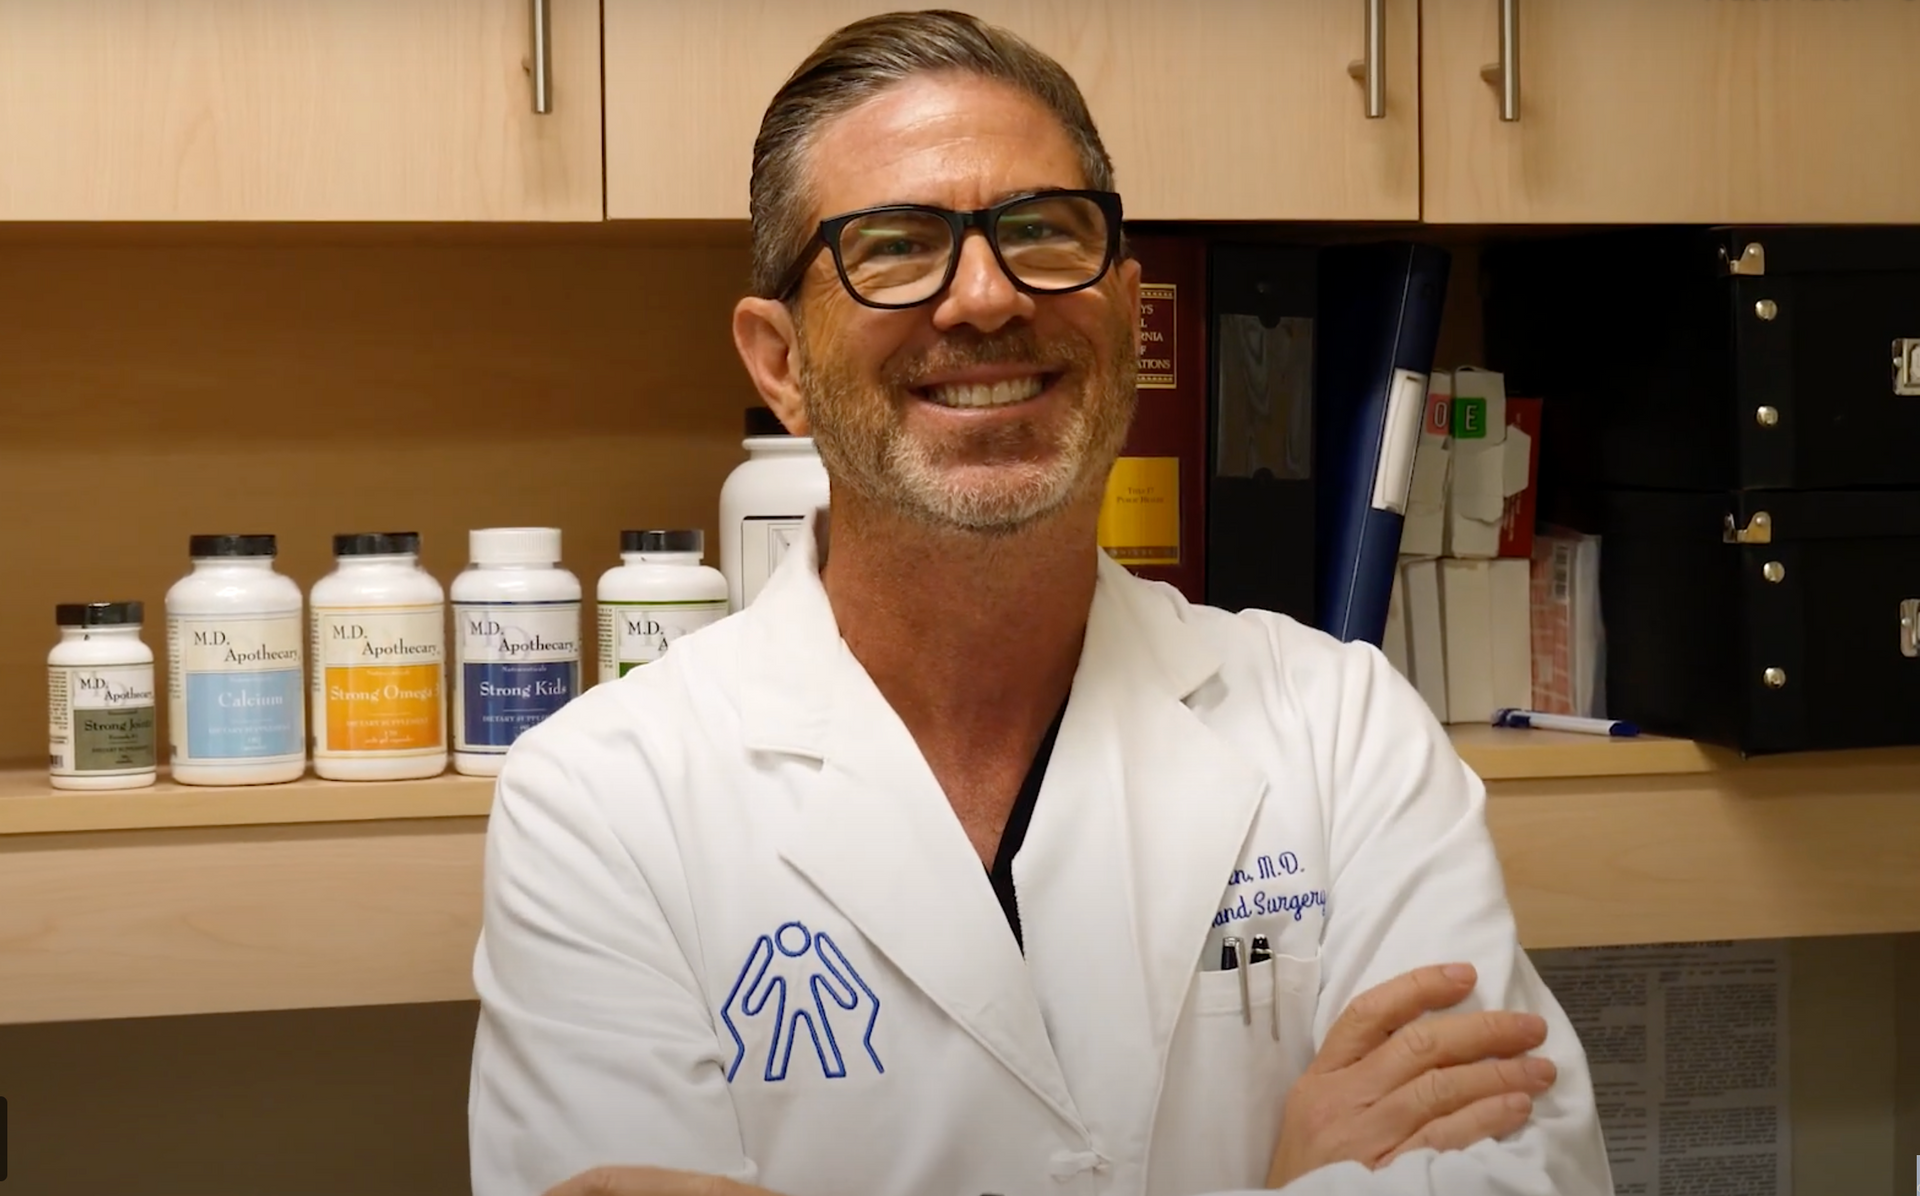 Load video: Message from Dr Glenn Cohen, well-known Orthopedic surgeon in California. Dr Glenn Cohen describes MD Apothecary products related to injury pain, musculoskeletal pain or nutritional deficit. The MD Apothecary are natural supplements focused on supporting joints, bones and cartilage. These supplement focus on helping patients overcome orthopedic challenges